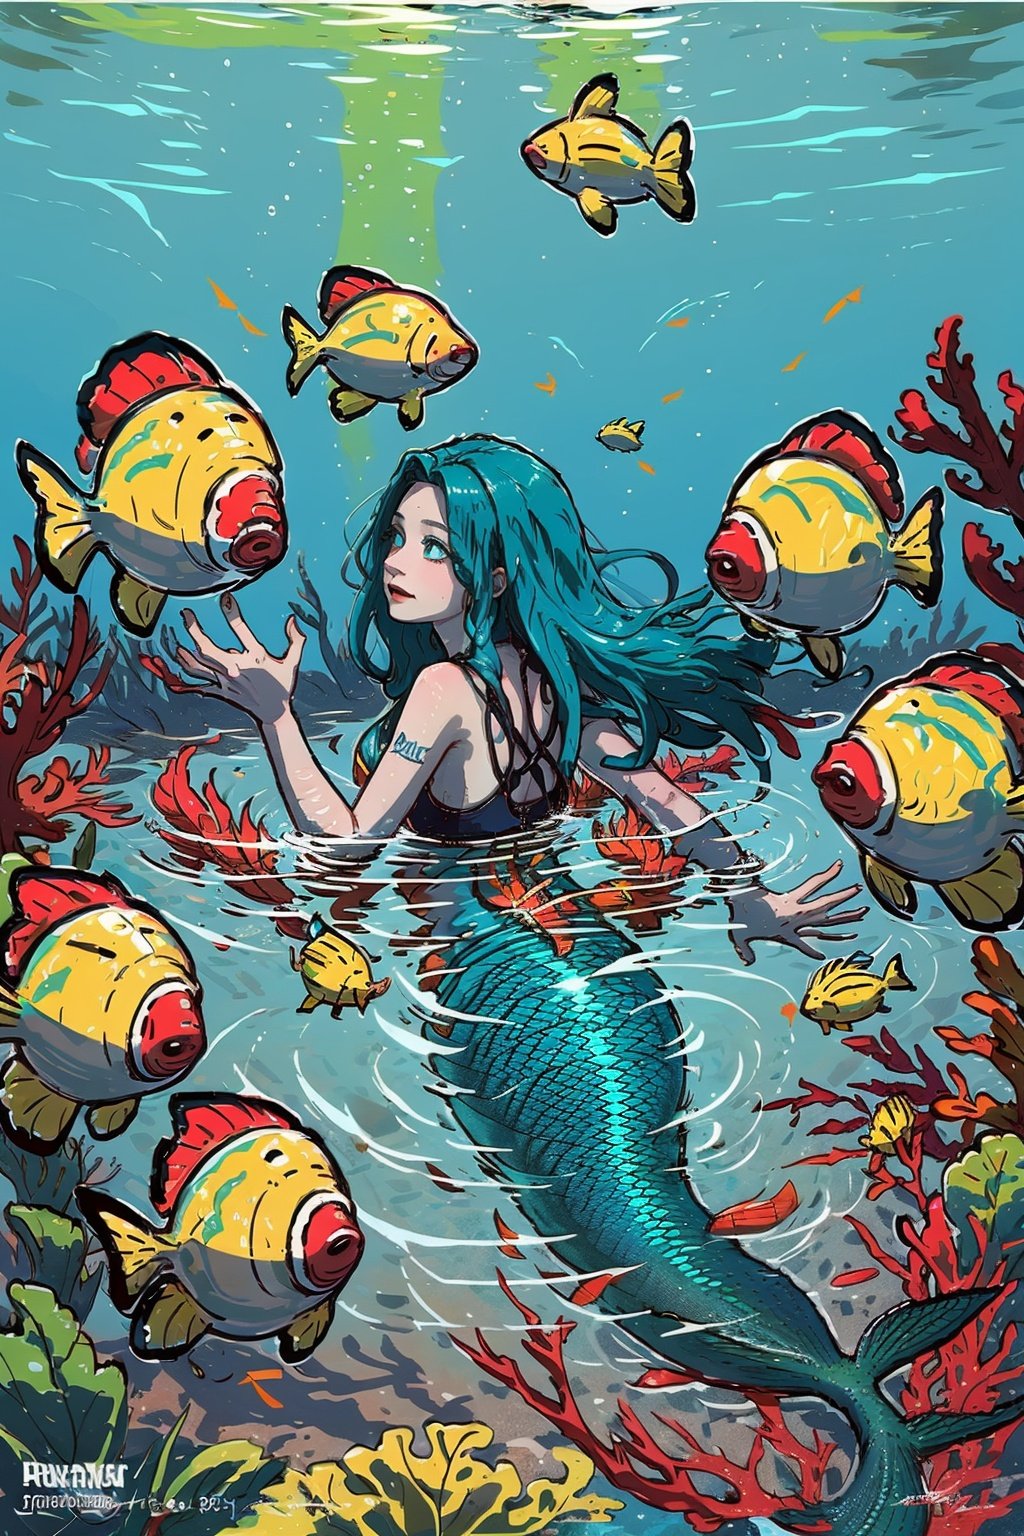 (masterpiece, best quality:1.5)<lora:EpicLogo-000008:0.8>, EpicLogo, Craft an enchanting image of a young and beautiful mermaid with a playful spirit. She possesses a cascade of sky-blue hair that flows in the water, and her aqua eyes sparkle with curiosity. The mermaid is surrounded by a vibrant underwater world, where colorful fish of various shapes and sizes swim around her. Capture the sense of joy and wonder as she interacts with the fish, their scales reflecting a mesmerizing array of hues. The scene is bathed in the gentle glow of sunlight filtering through the water, 